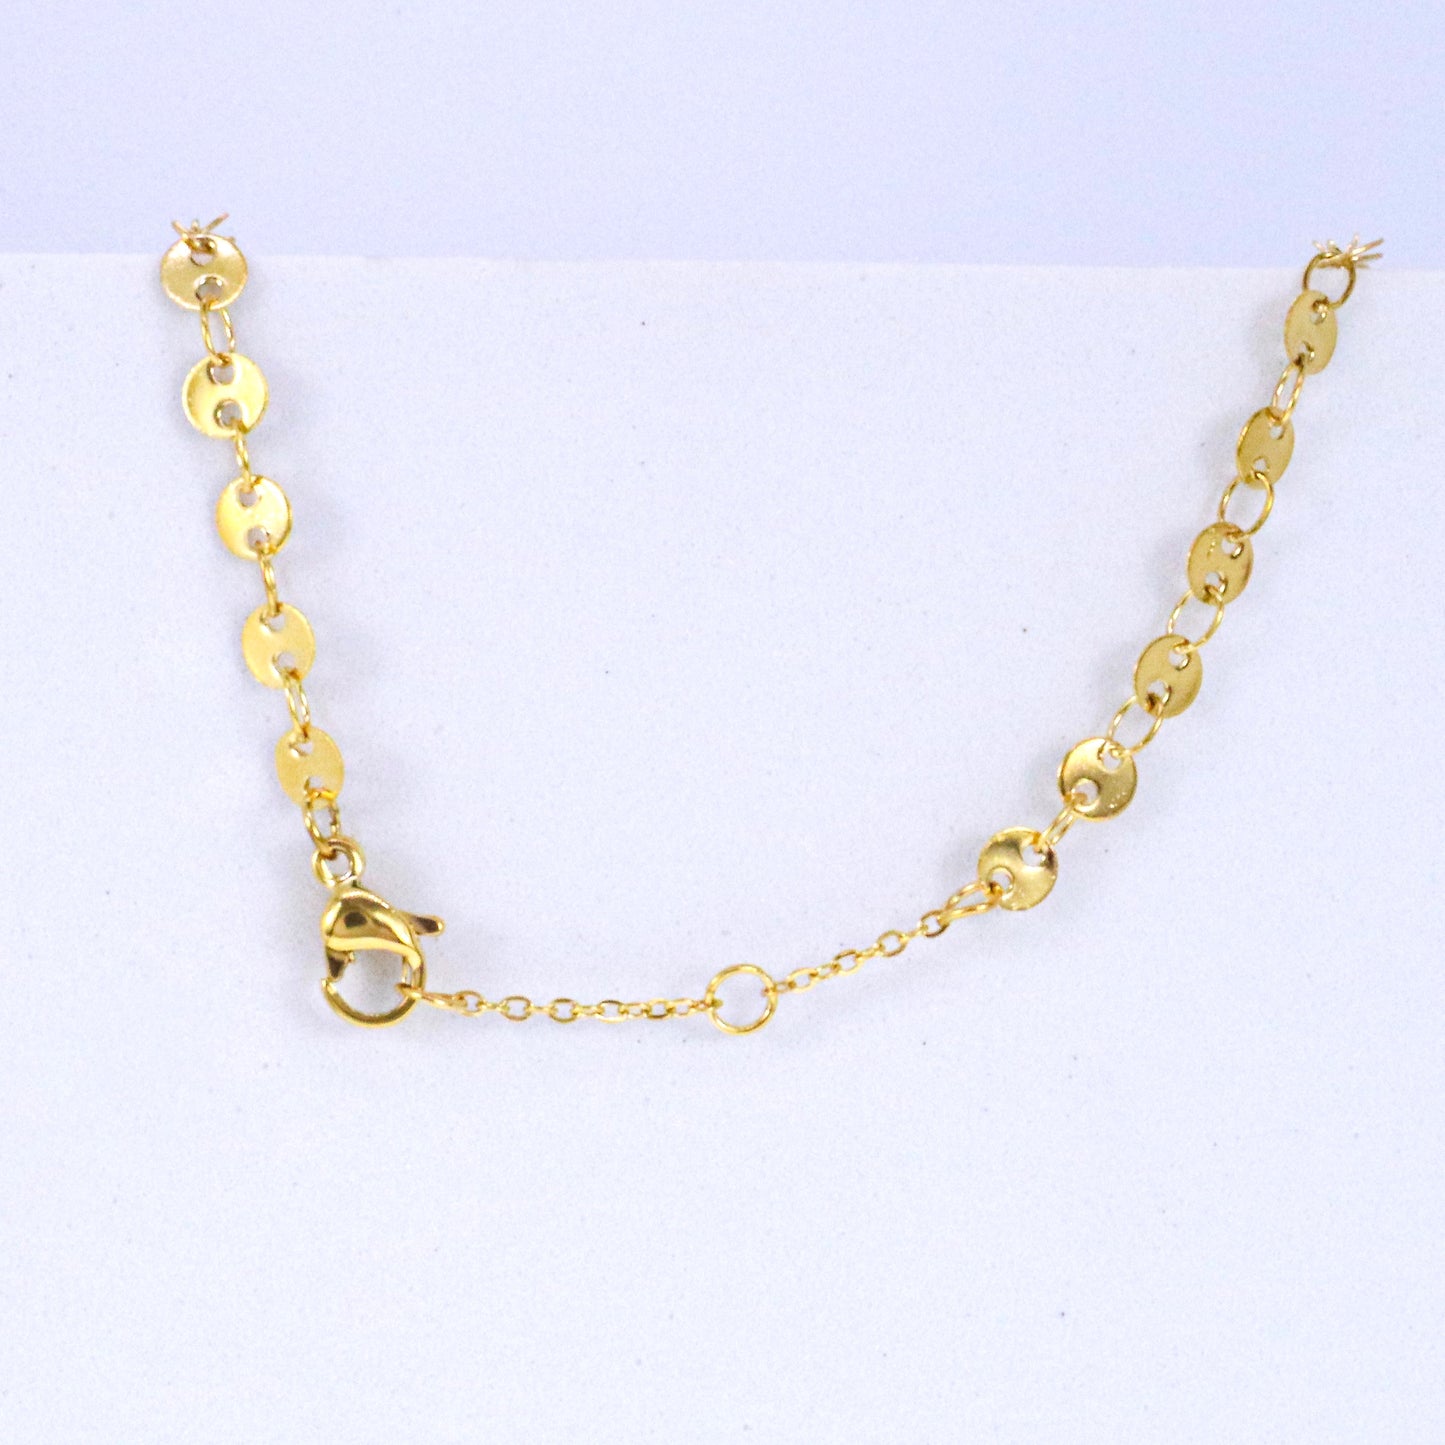 Shimmer Gold Delicate Choker Stainless Steel Necklace